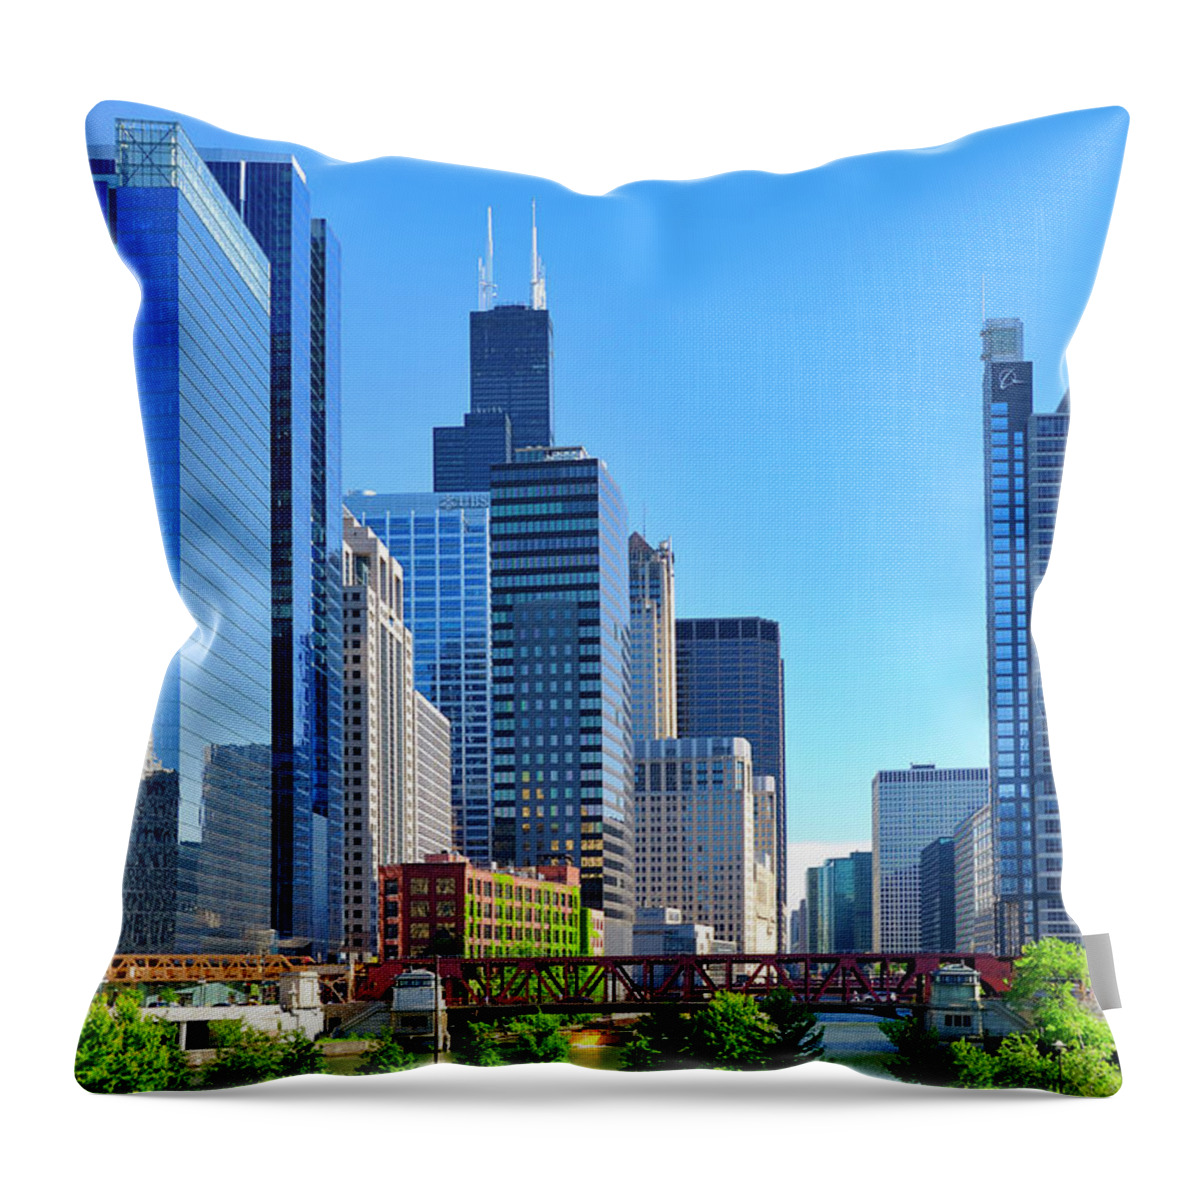 Estock Throw Pillow featuring the digital art Chicago River In Downtown by Heeb Photos